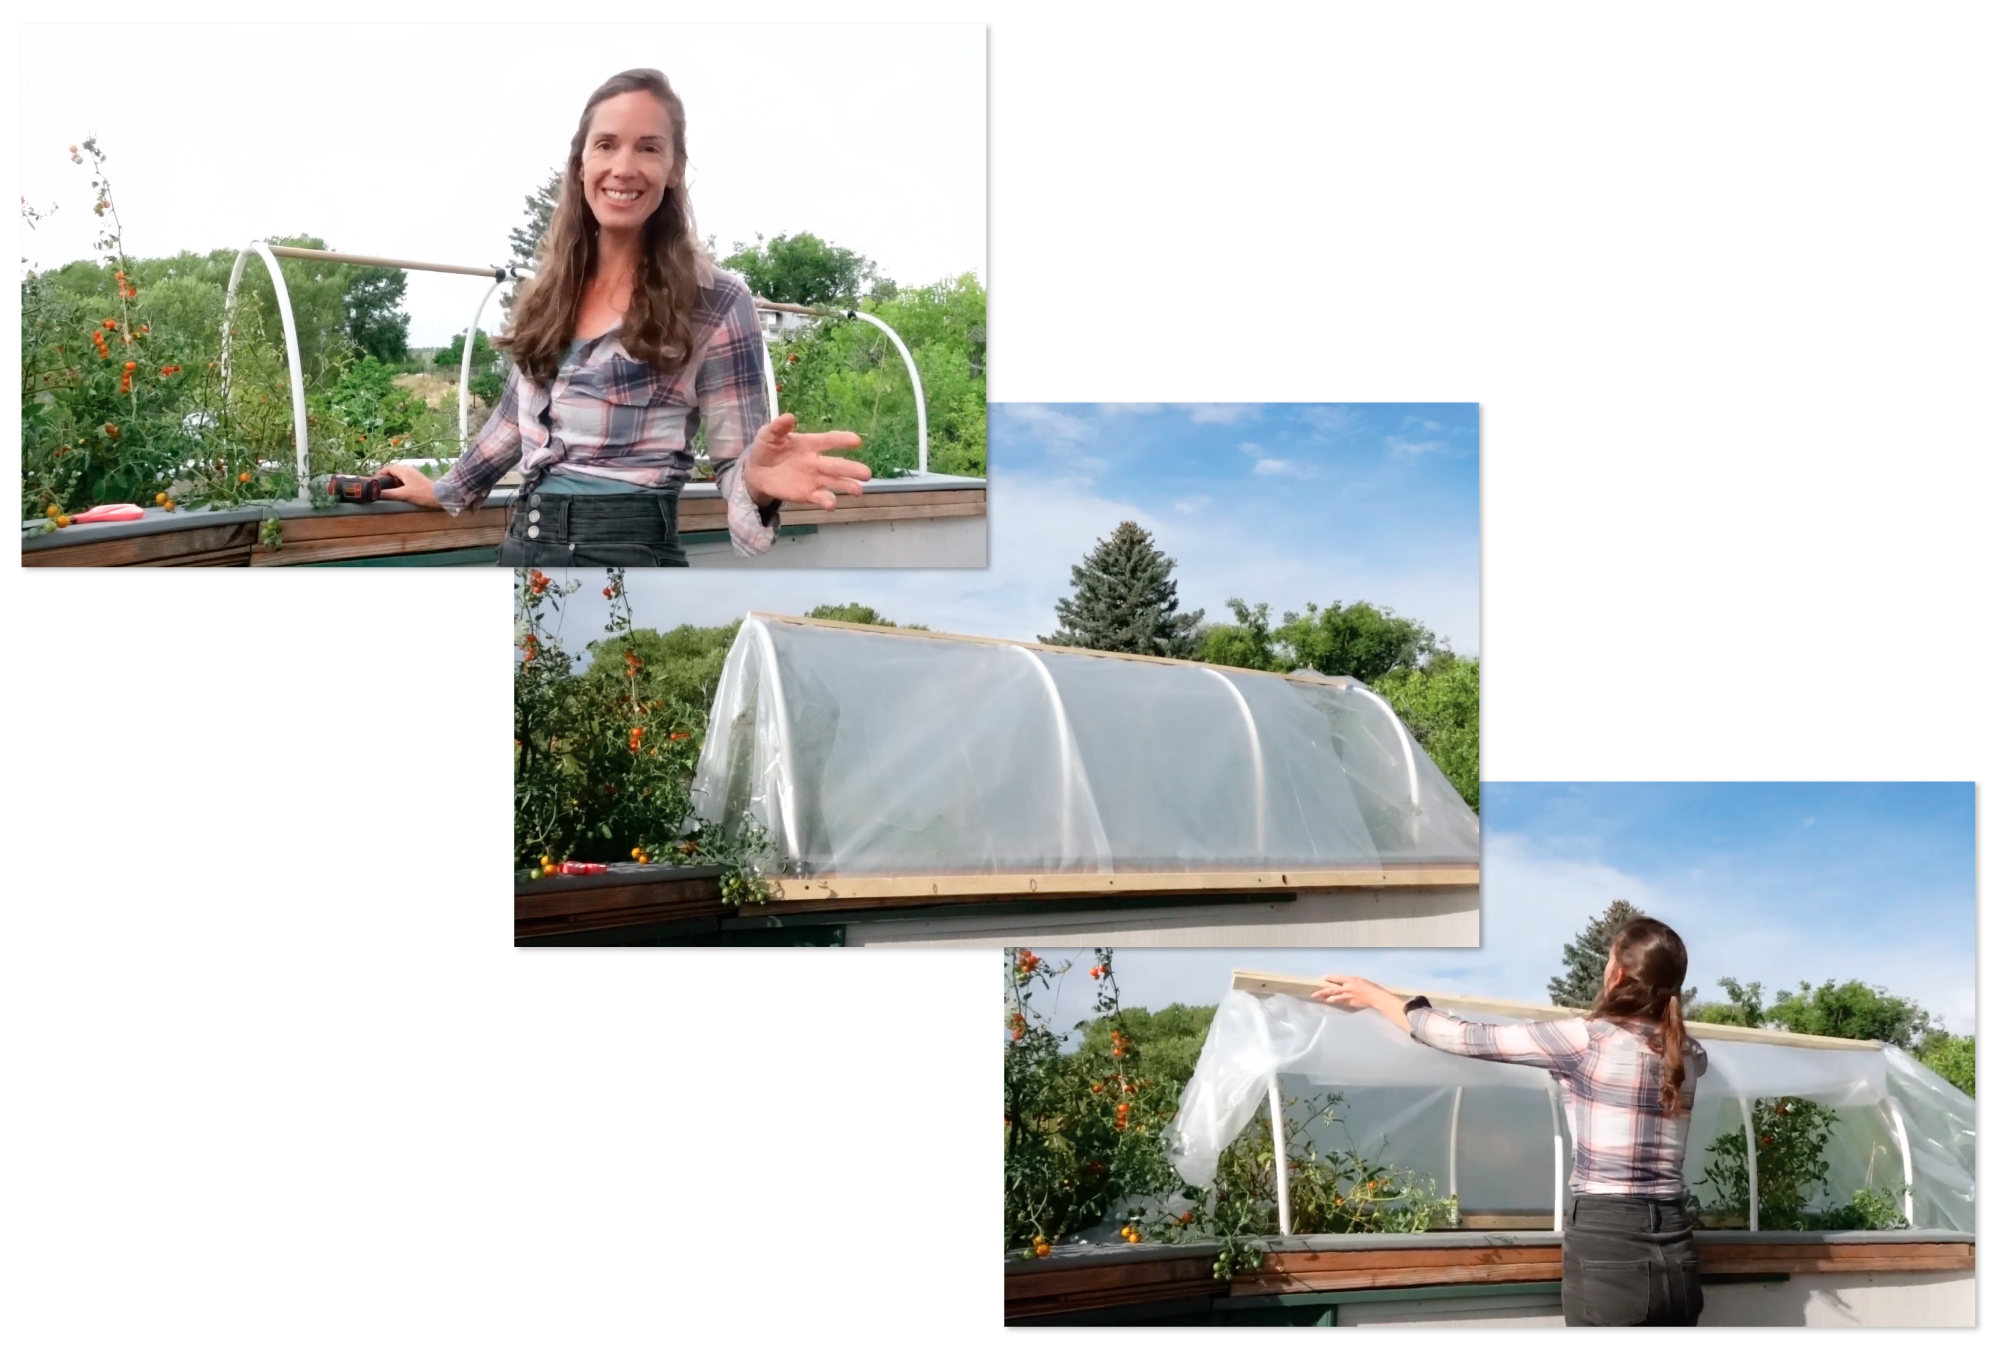 Tips for Extending the Growing Season with Sarah Peterson of The Grow Network